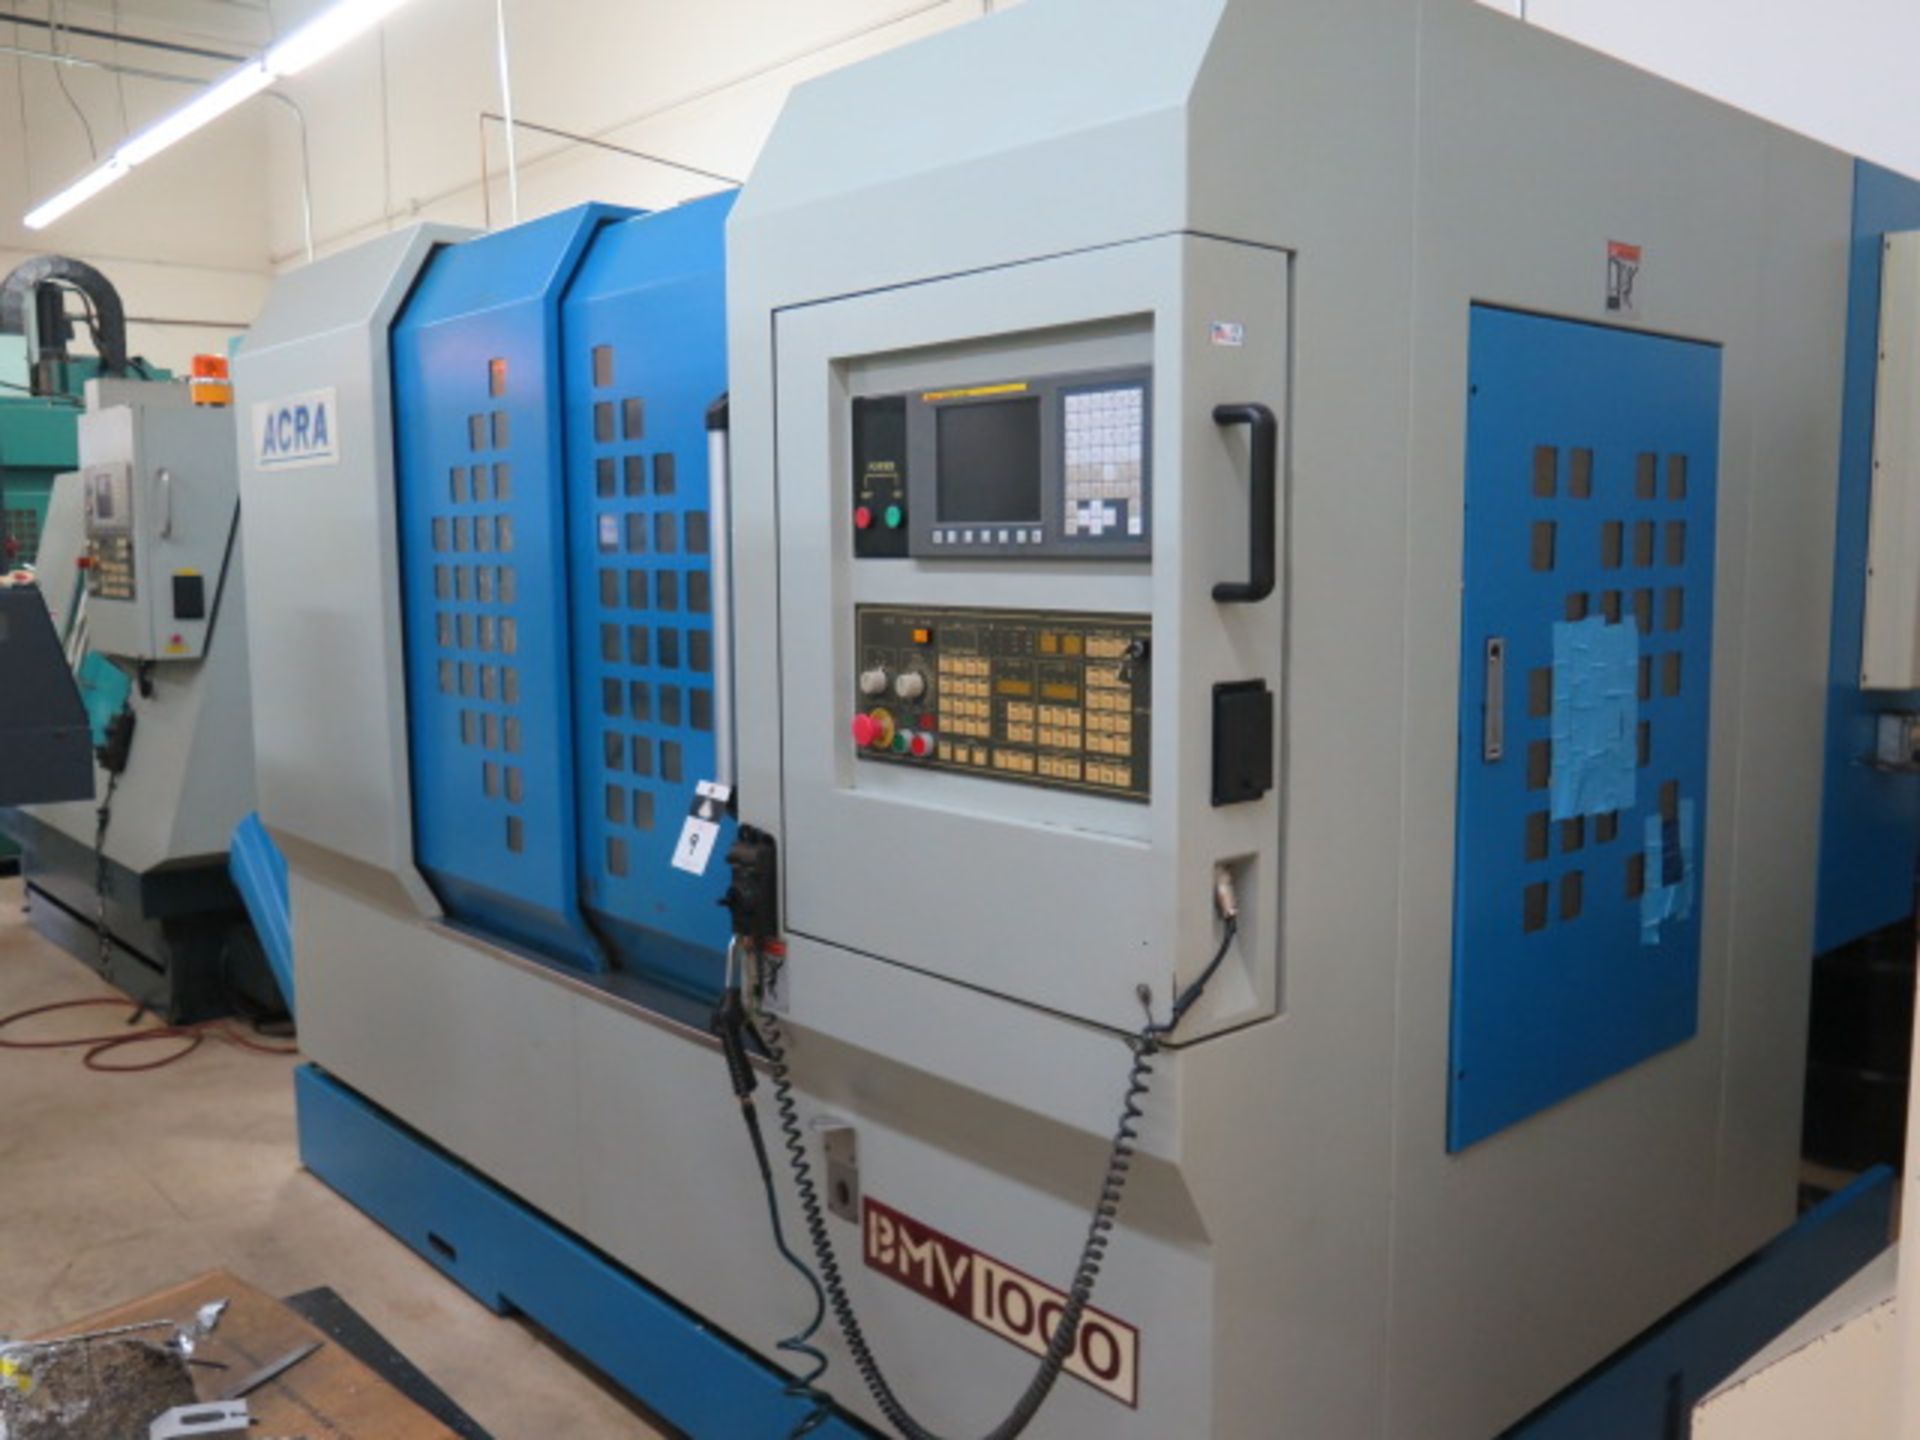 2001 Acra BVM1000 CNC VMC s/n V10106036 w/ Fanuc Series 0i-MC Controls, Hand Wheel, SOLD AS IS - Image 2 of 17